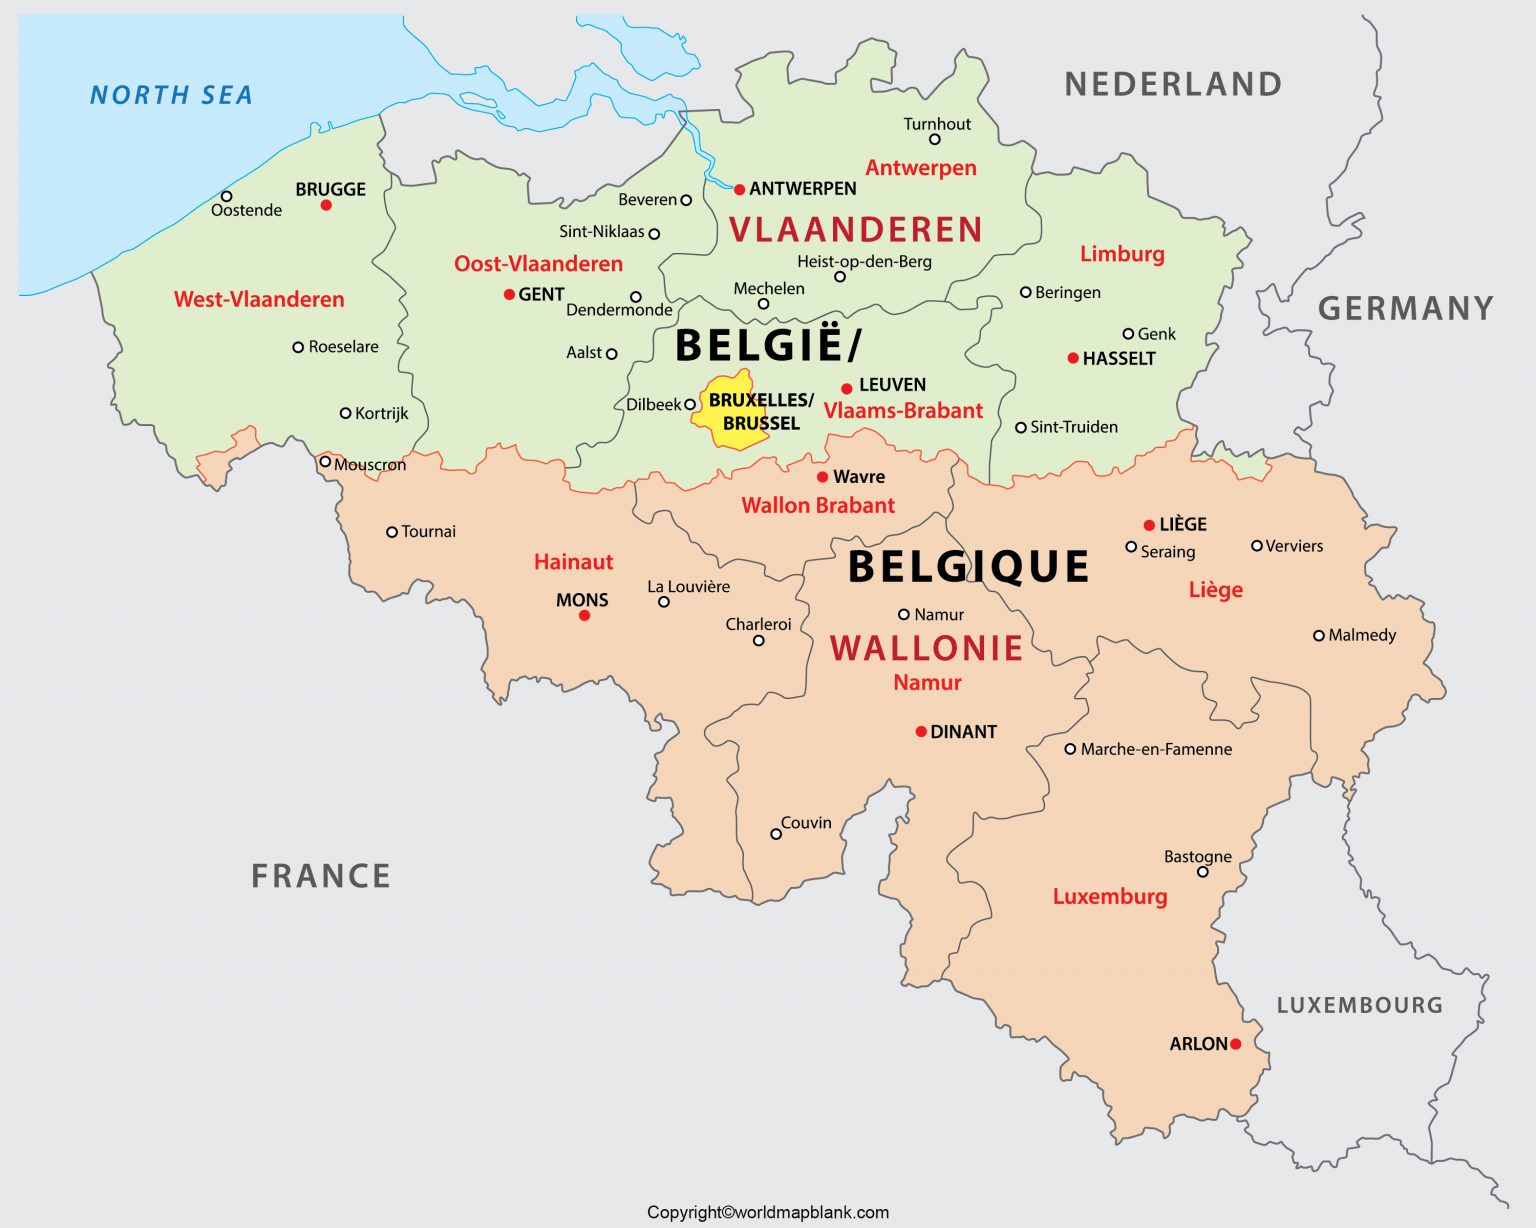 Labeled Map of Belgium with States, Capital & Cities